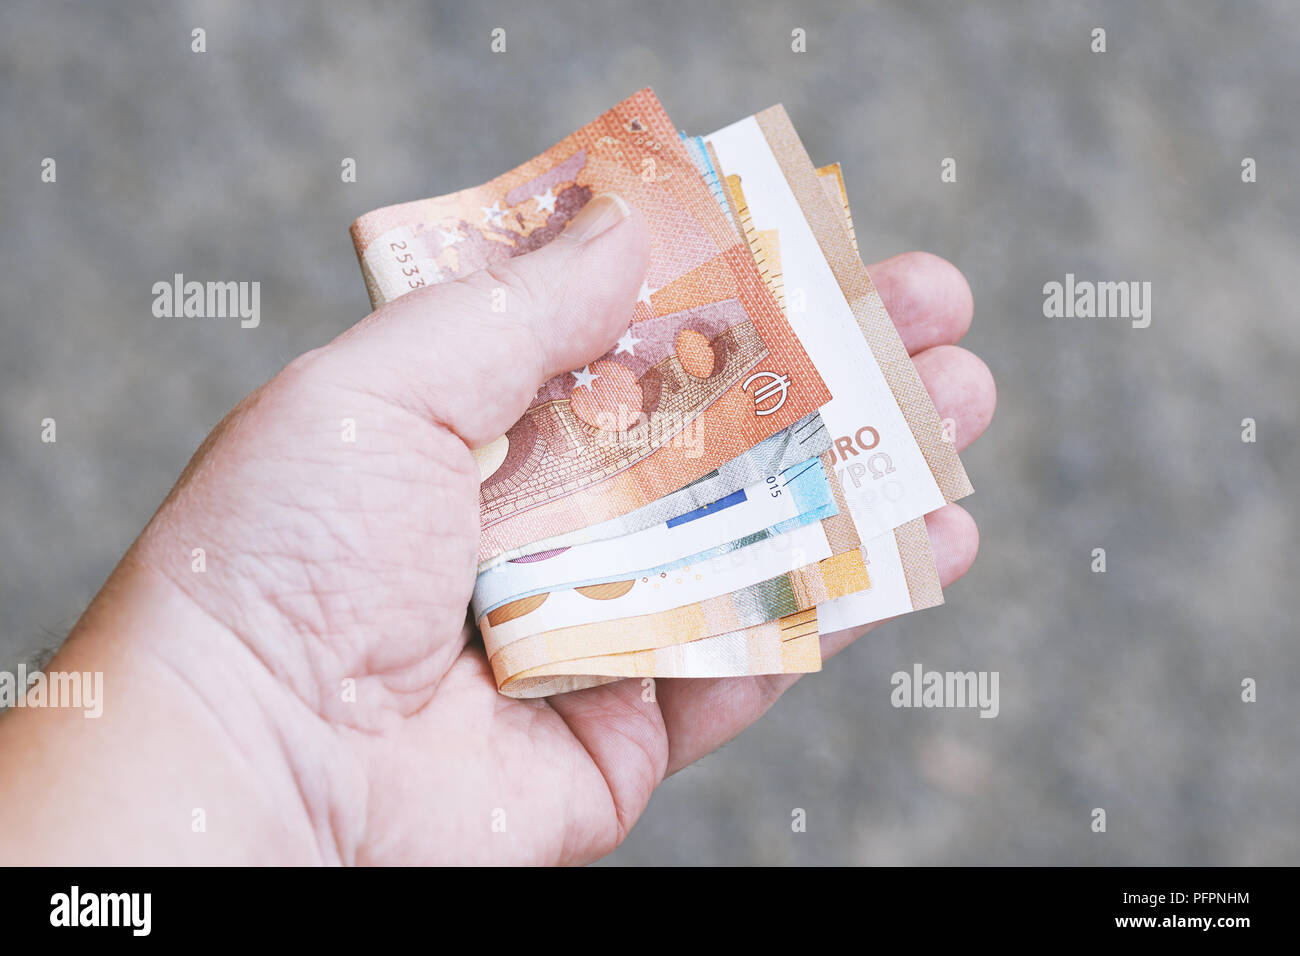 hand holding fistful of euro banknotes, money finance bribe buying spending or purchasing power concept Stock Photo